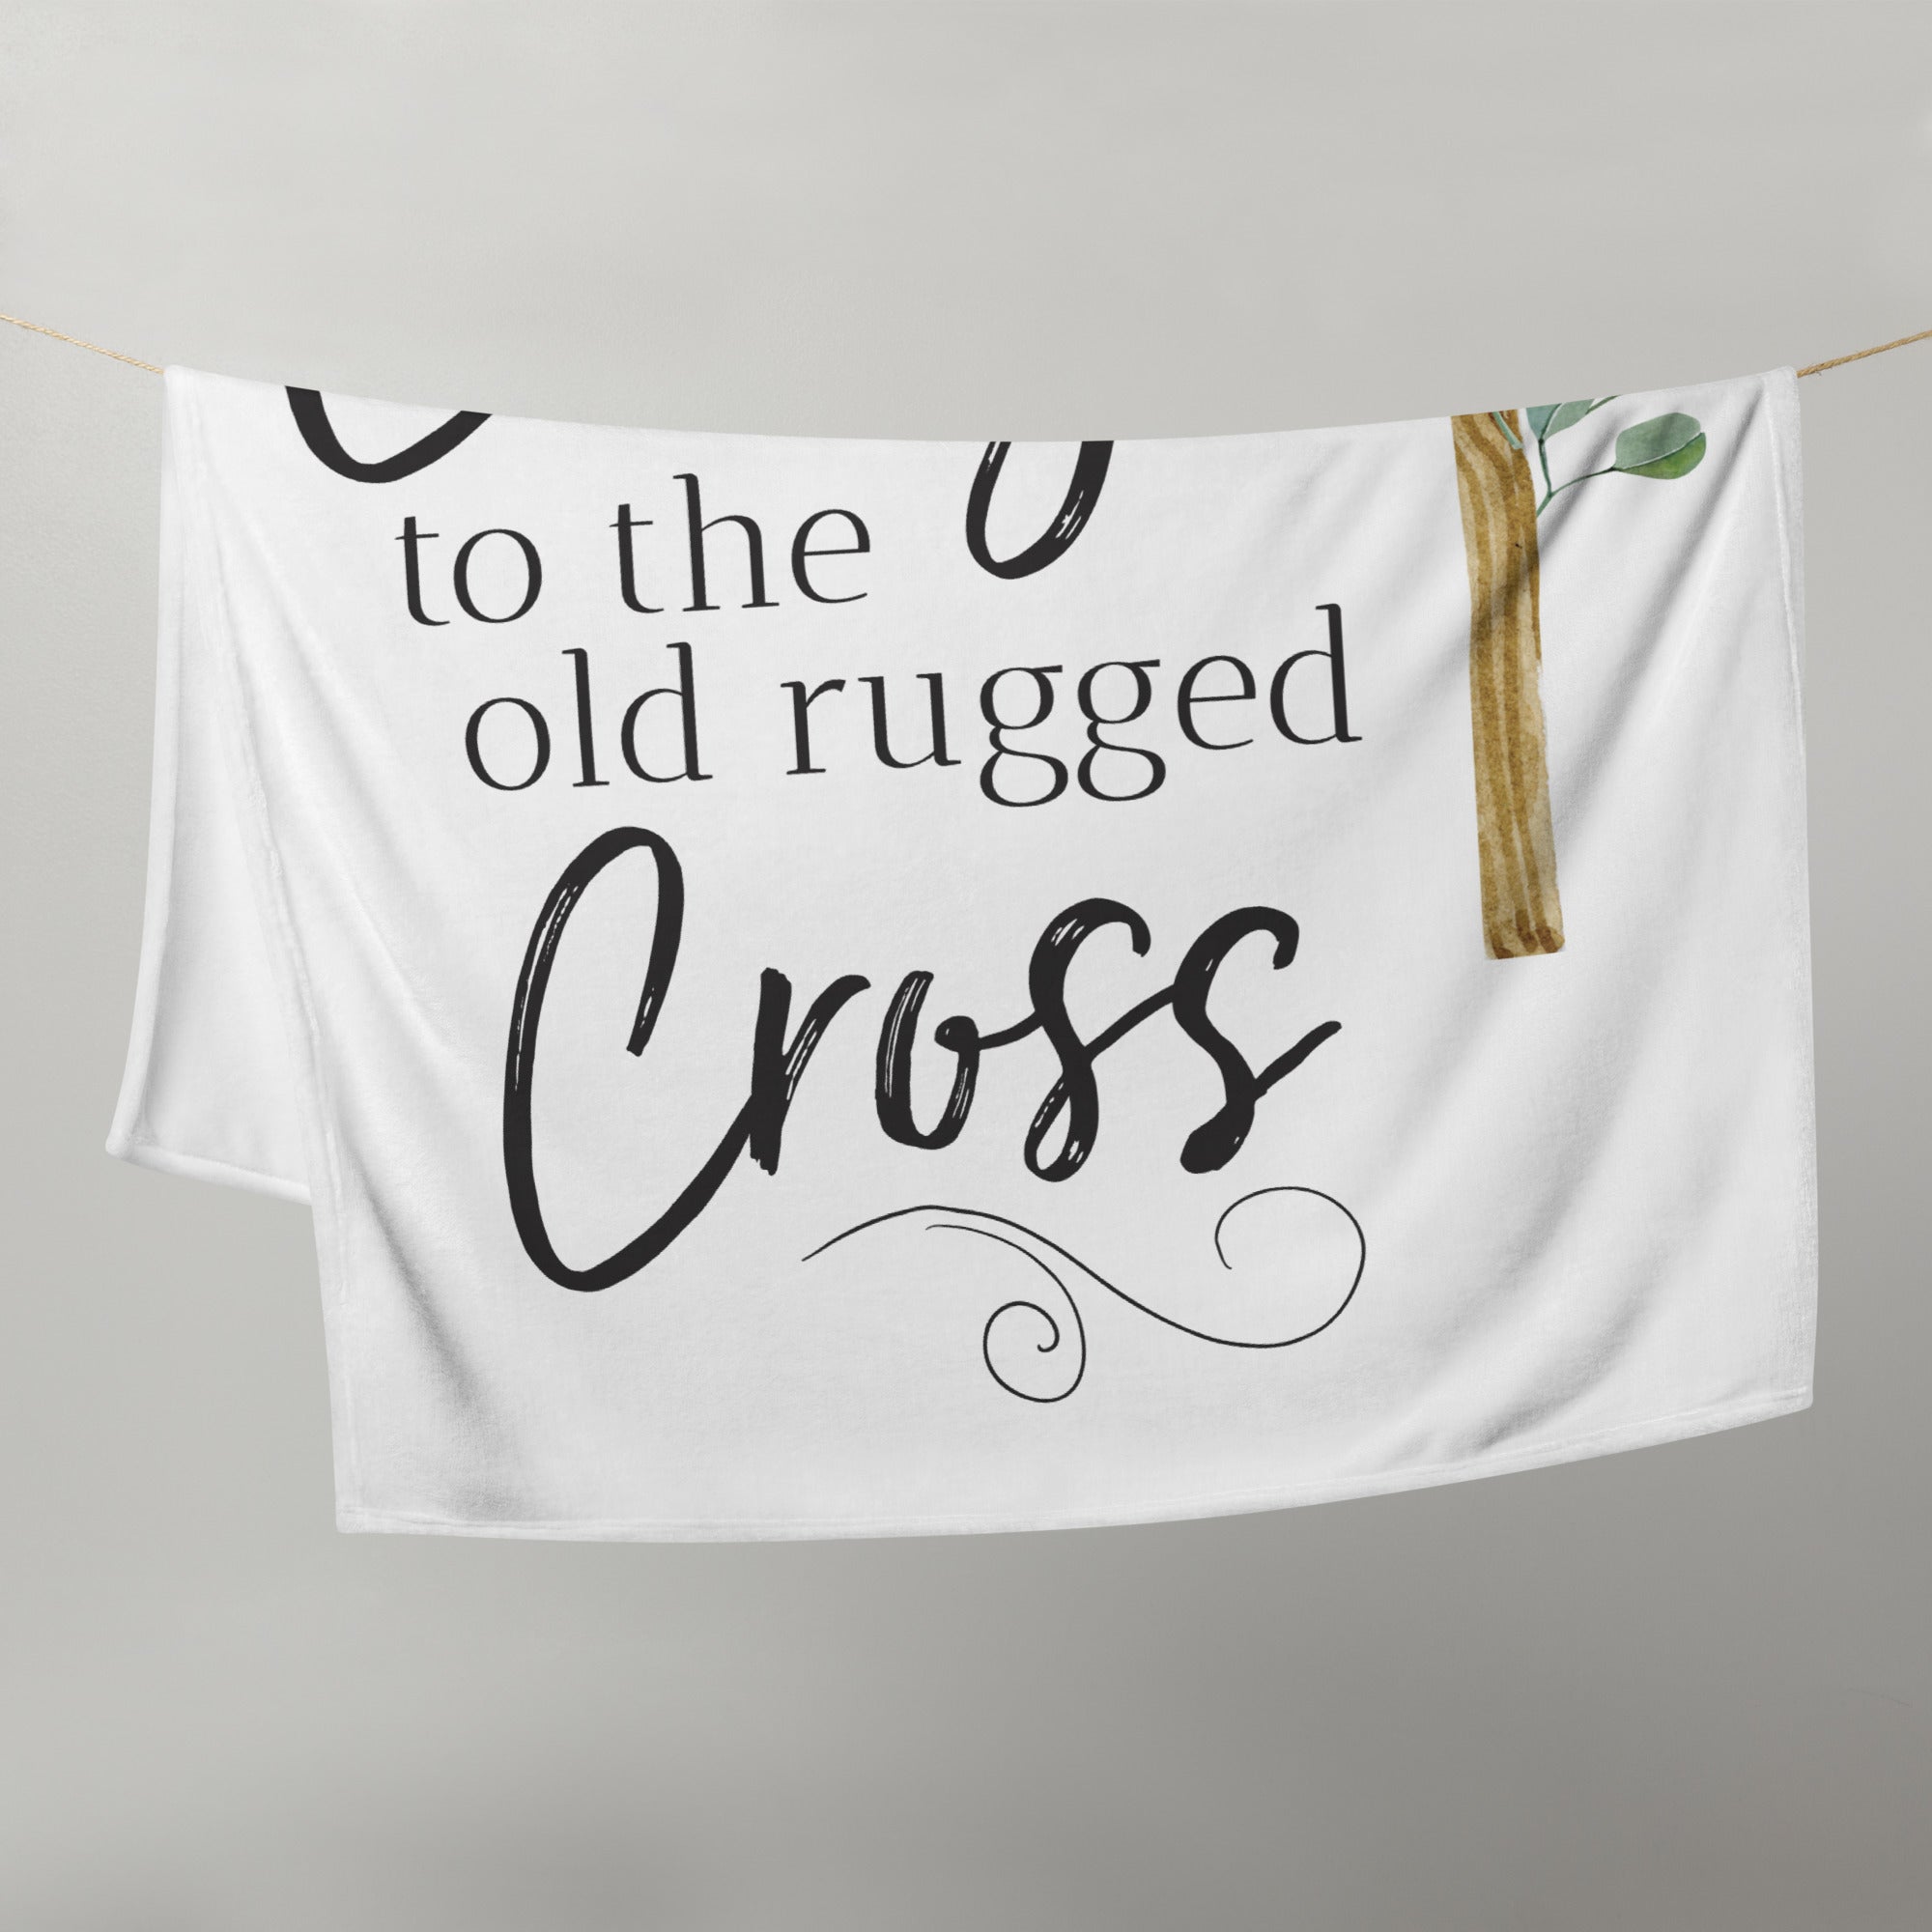 Vintage-Inspired Throw Blanket For Home Décor & Gift Ideas - I Will Cling To The Old Rug - LifeSong Milestones